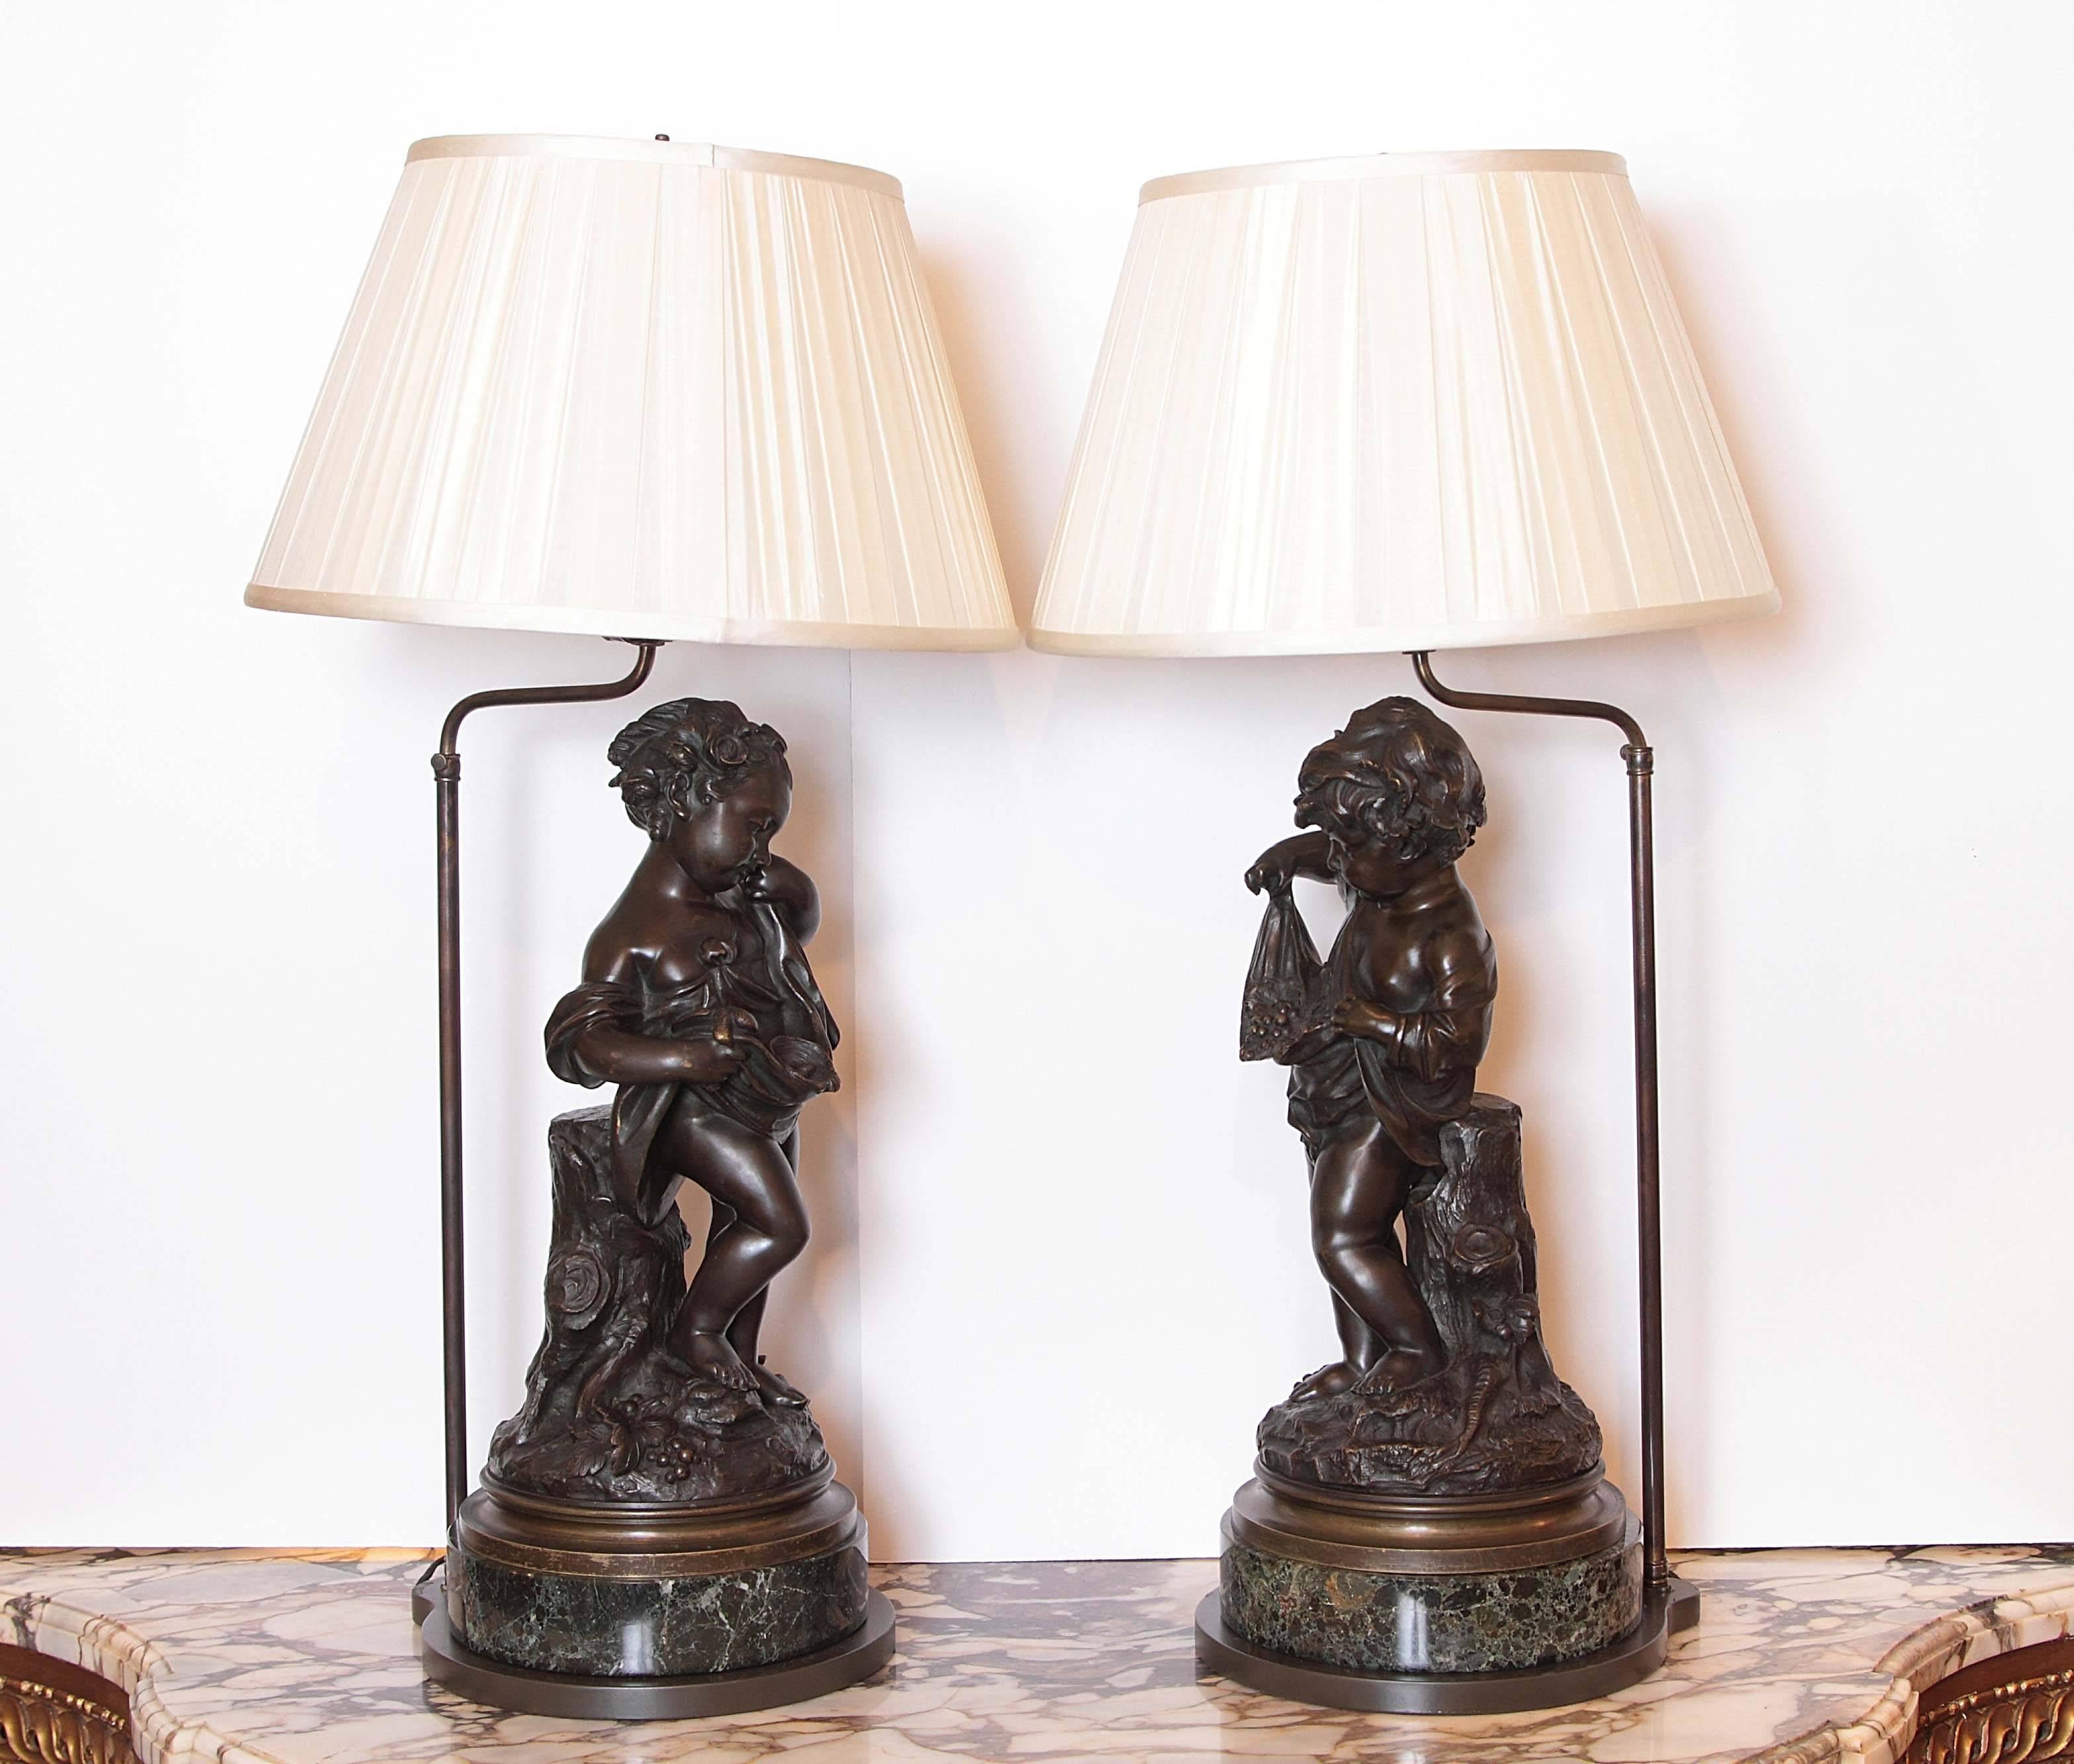 Pair of 19th Century French Patinated Bronze Figures of Cherubs Made into Lamps 2